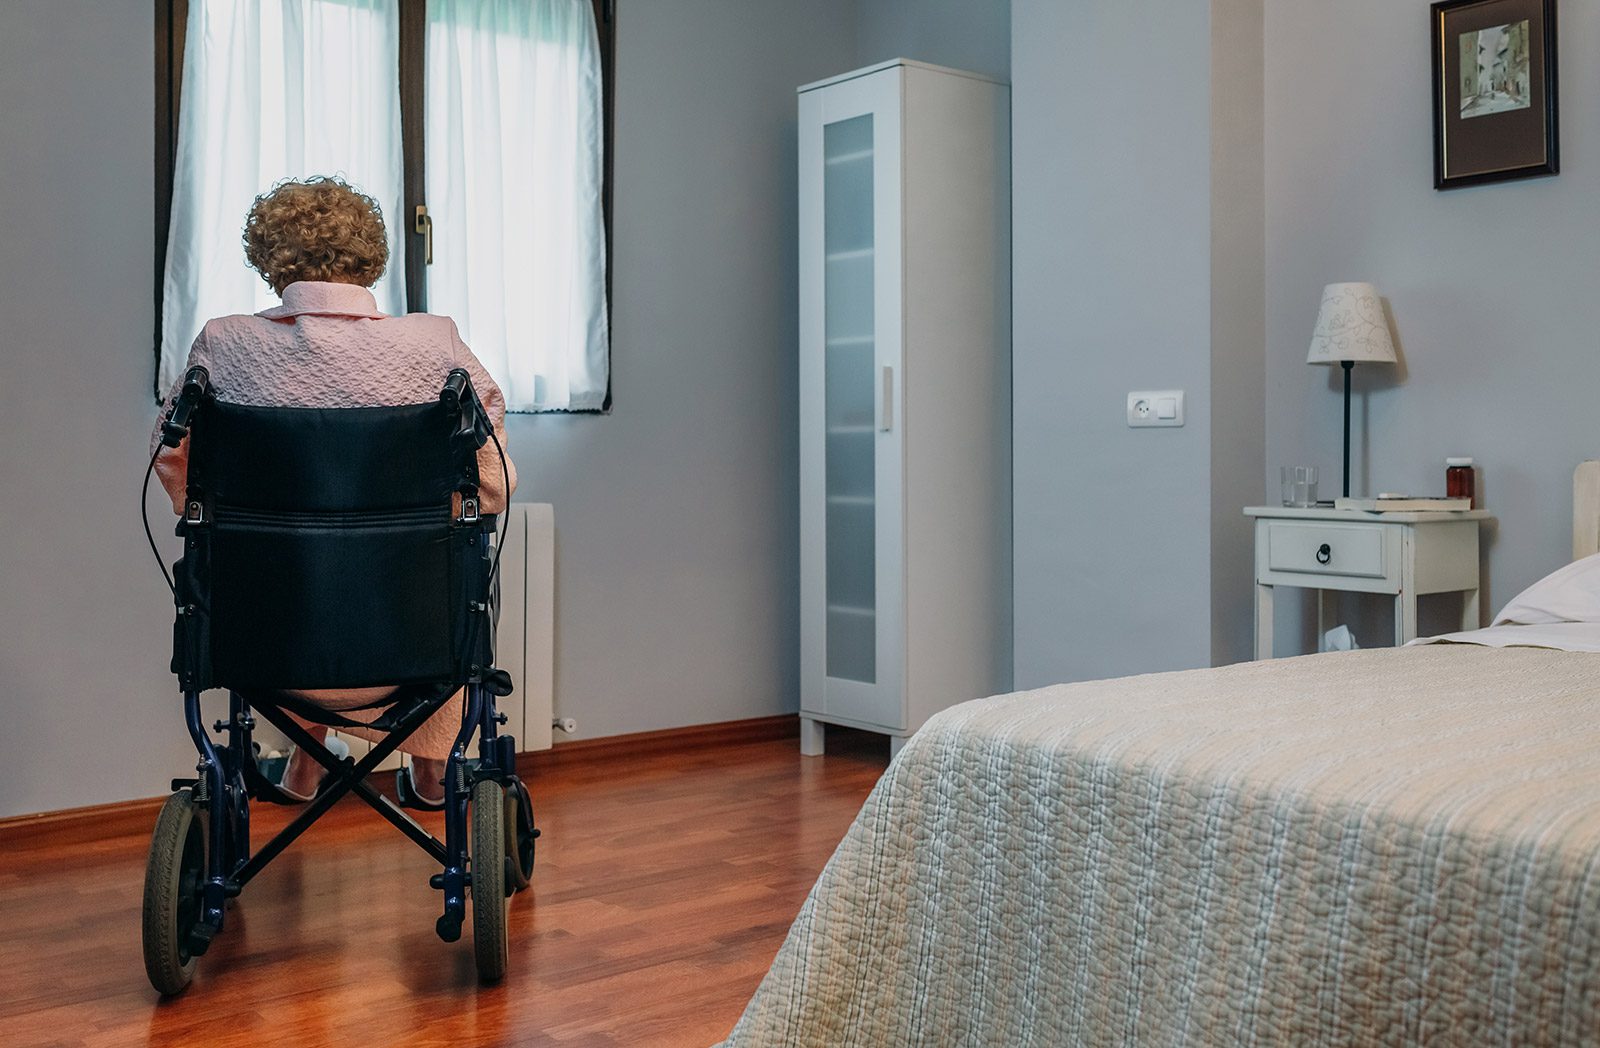 A woman sitting in a wheelchair looking out the window.